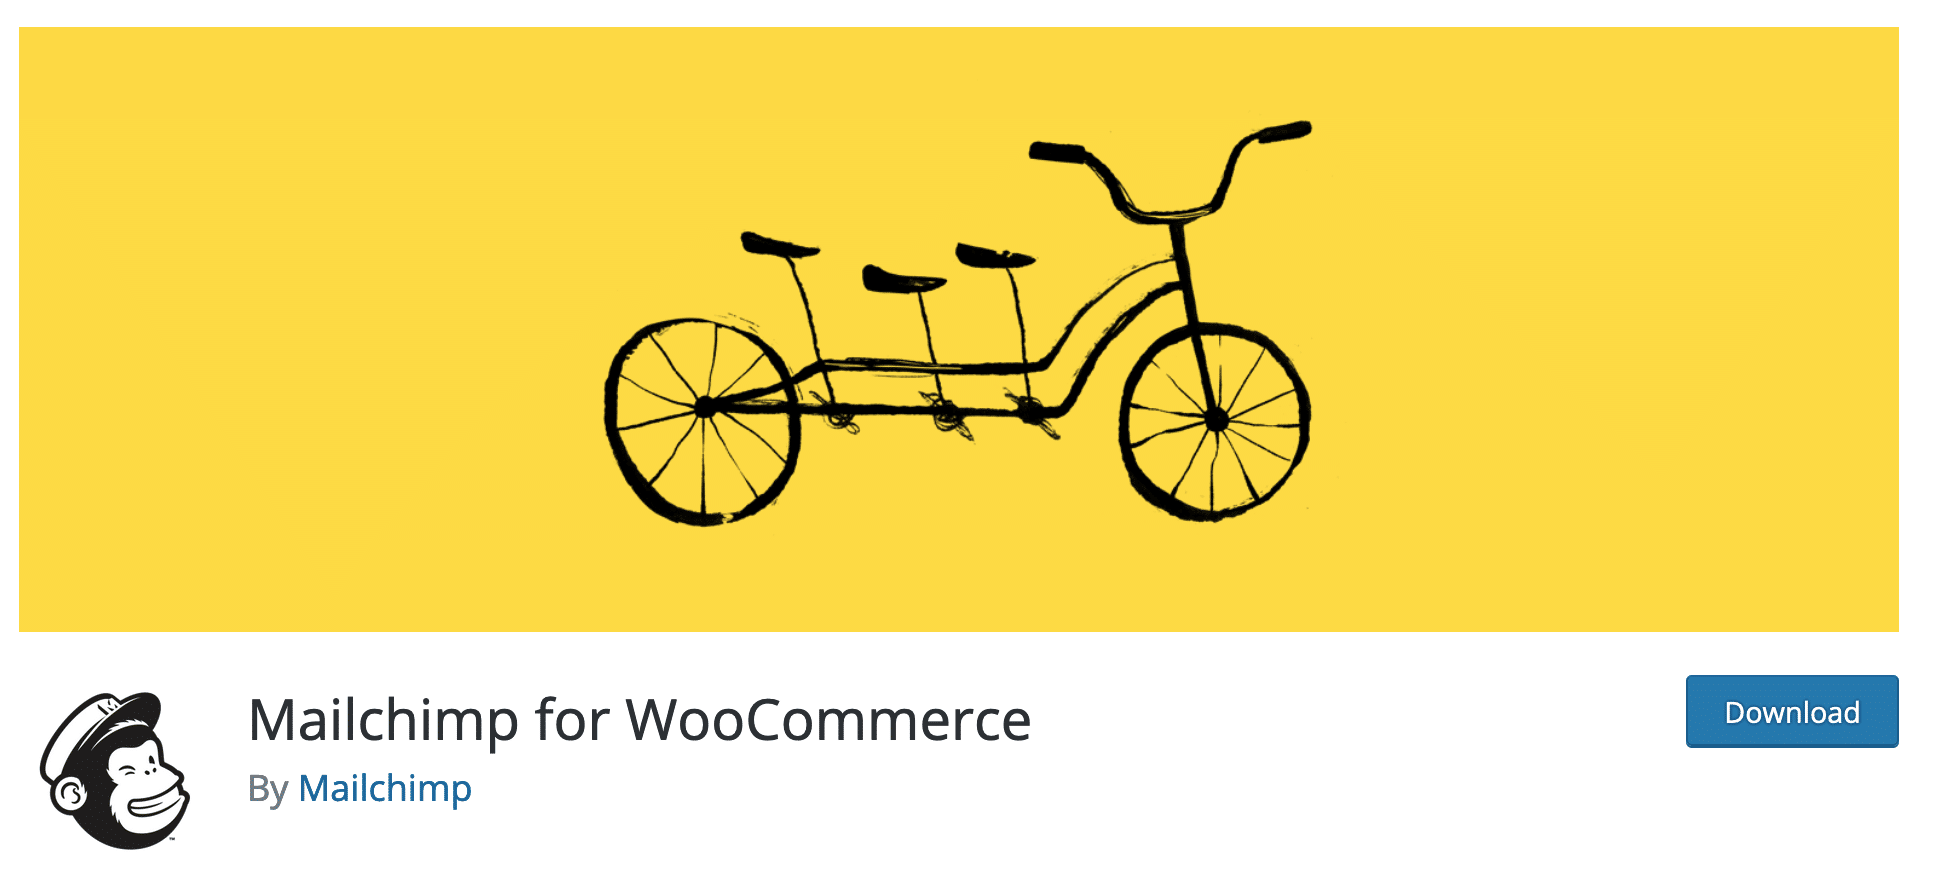 The plugin Mailchimp for WooCommerce to download on the official WordPress directory.